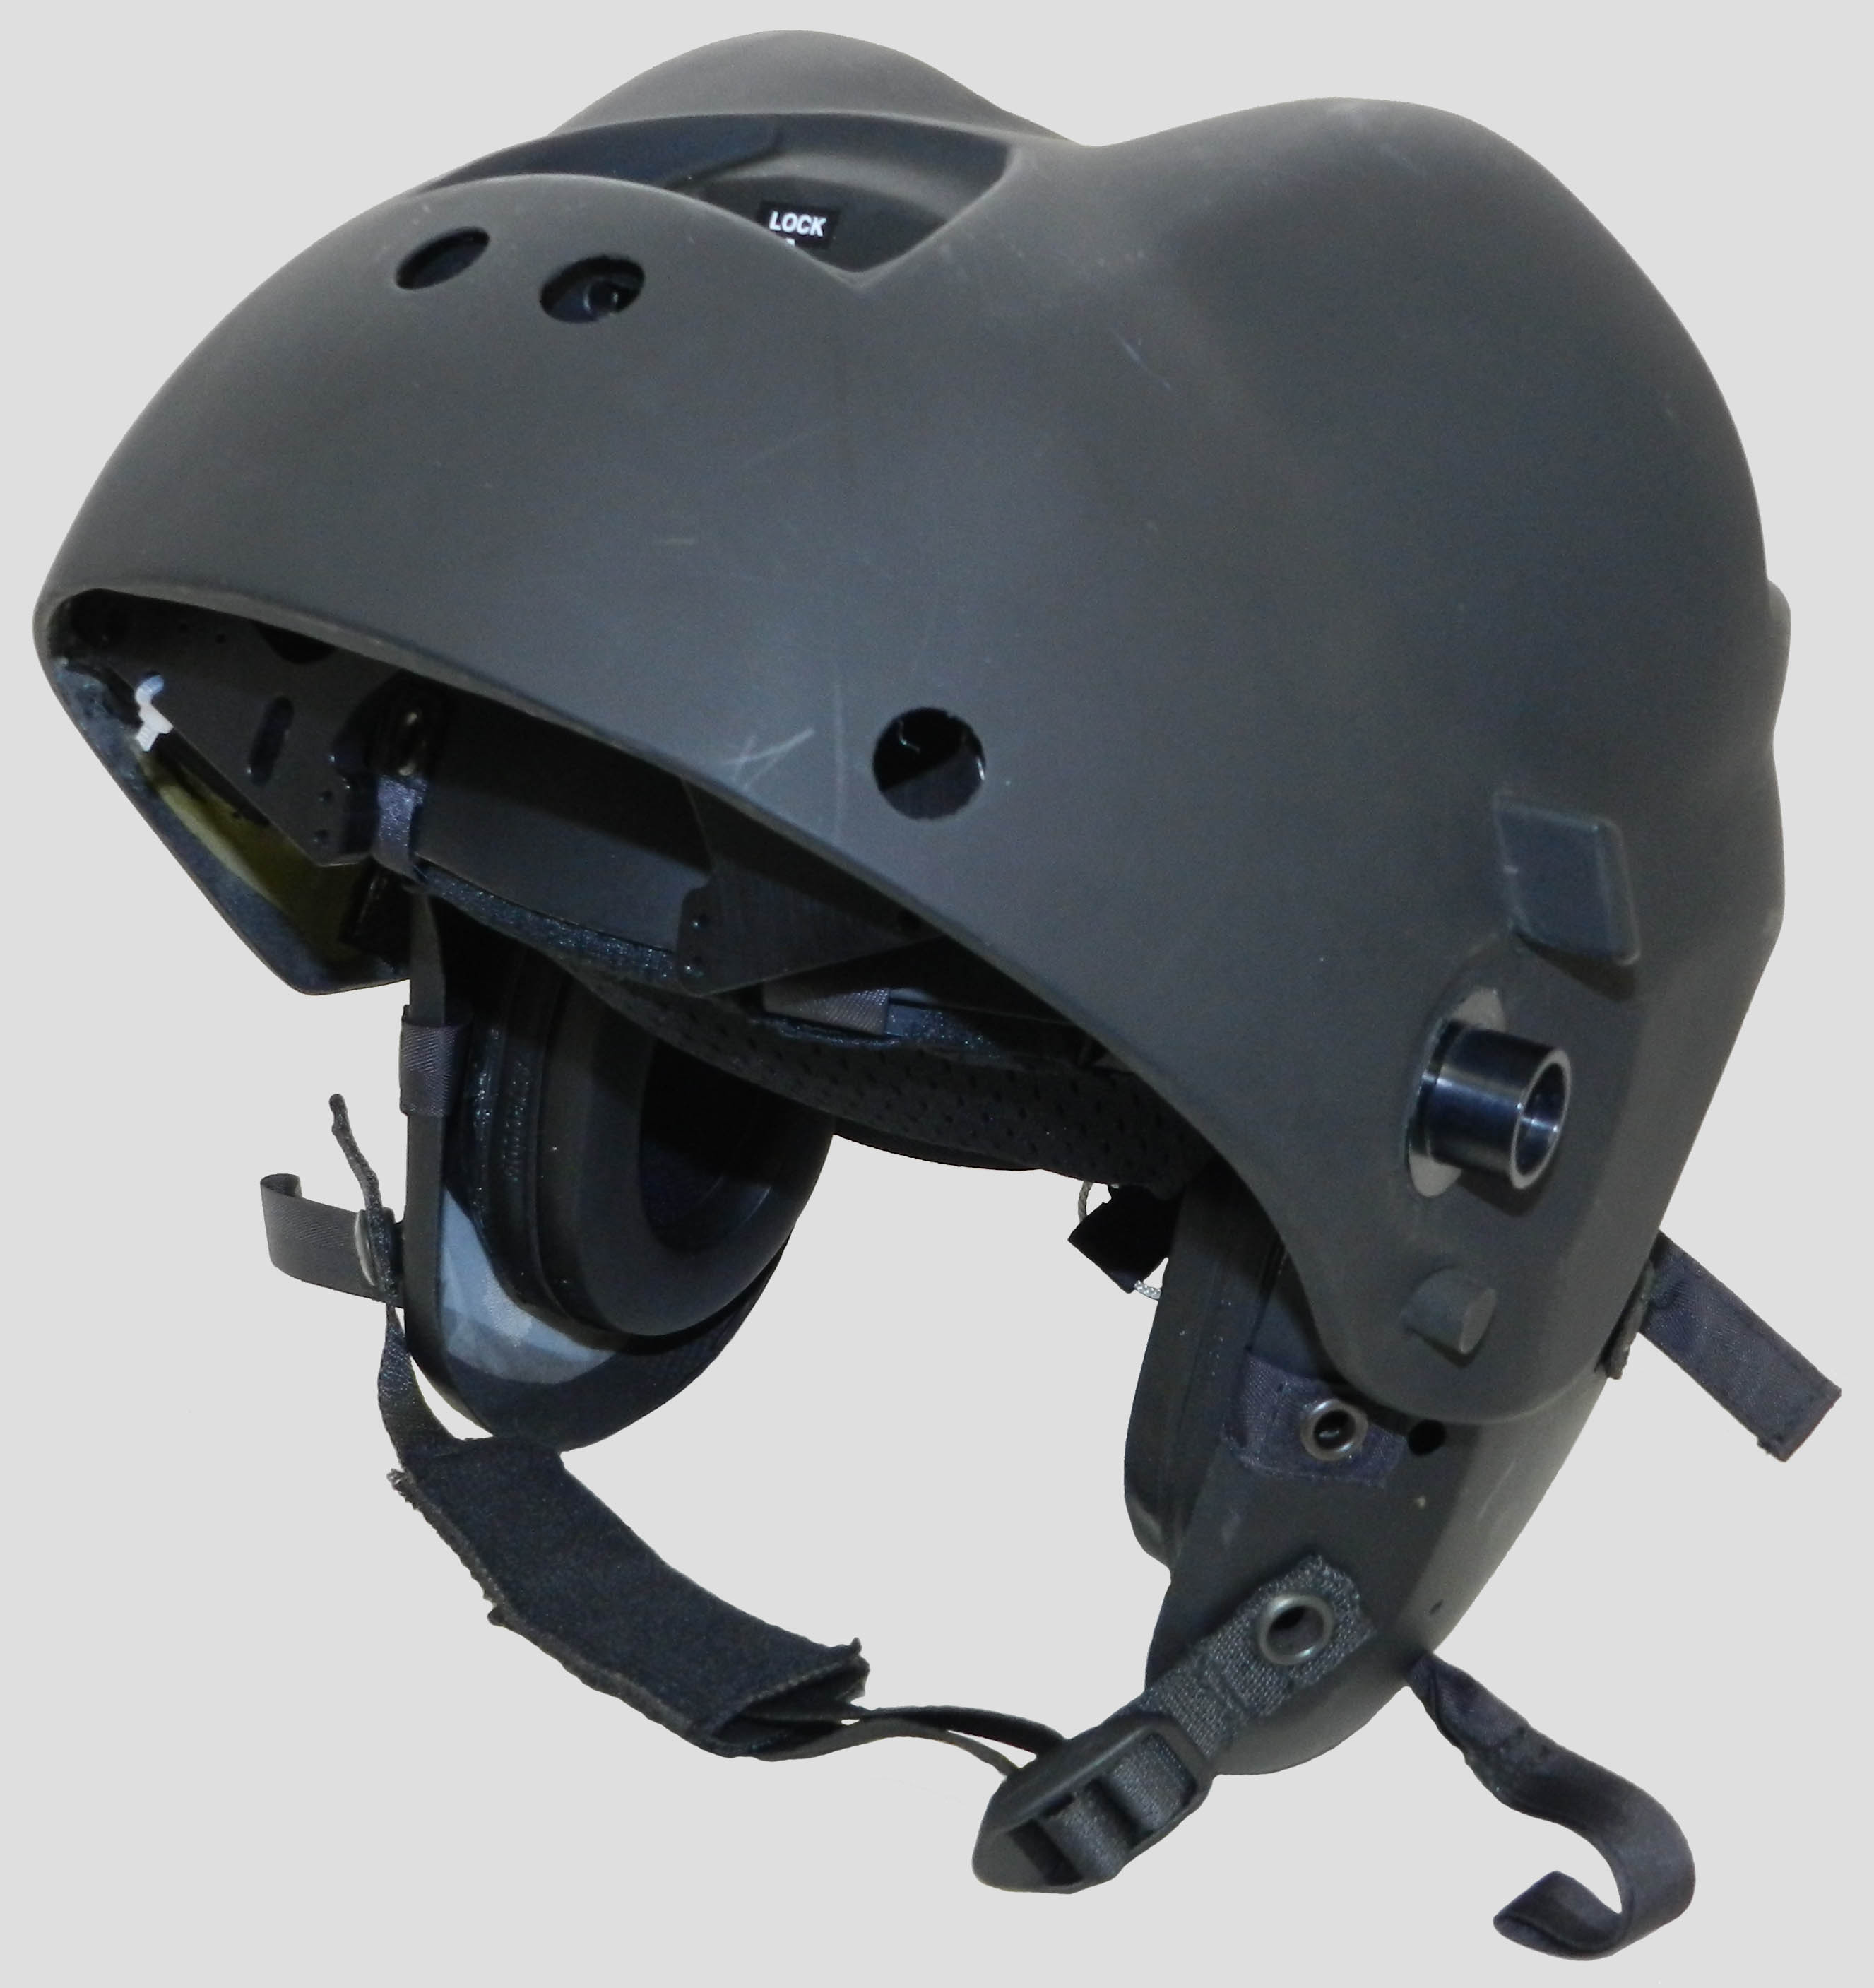 Viper-like HMD for H-1 Helicopter Programme